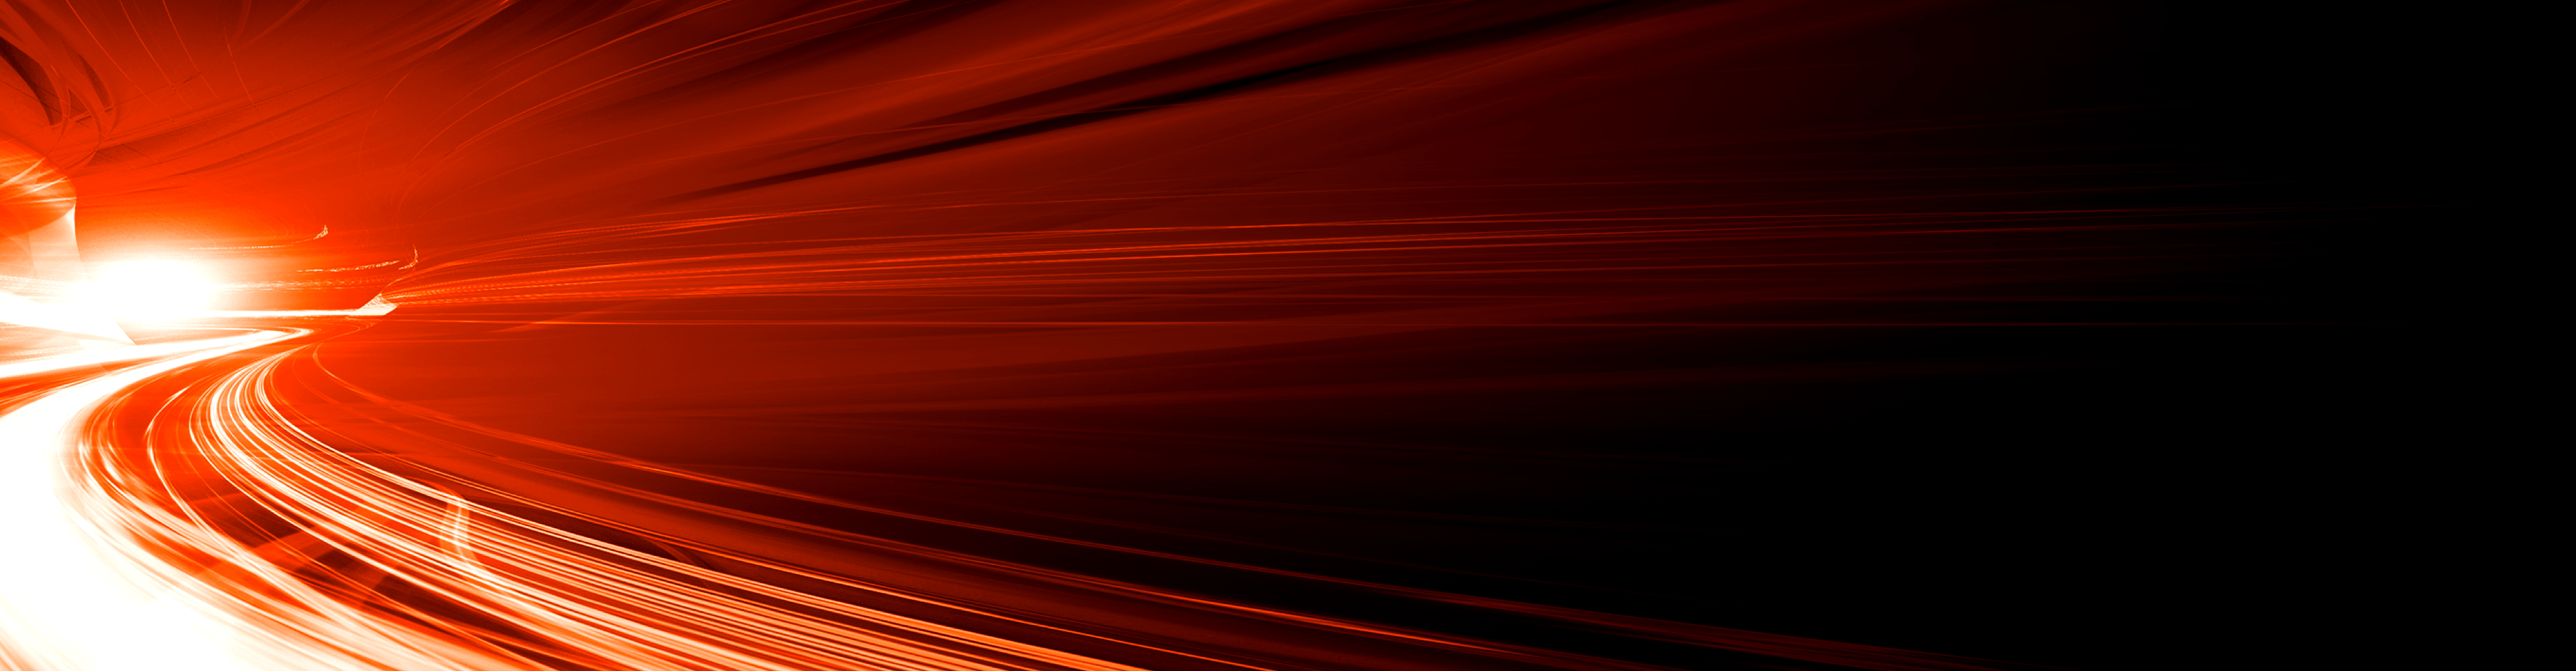 Background image of white and red rays of light 